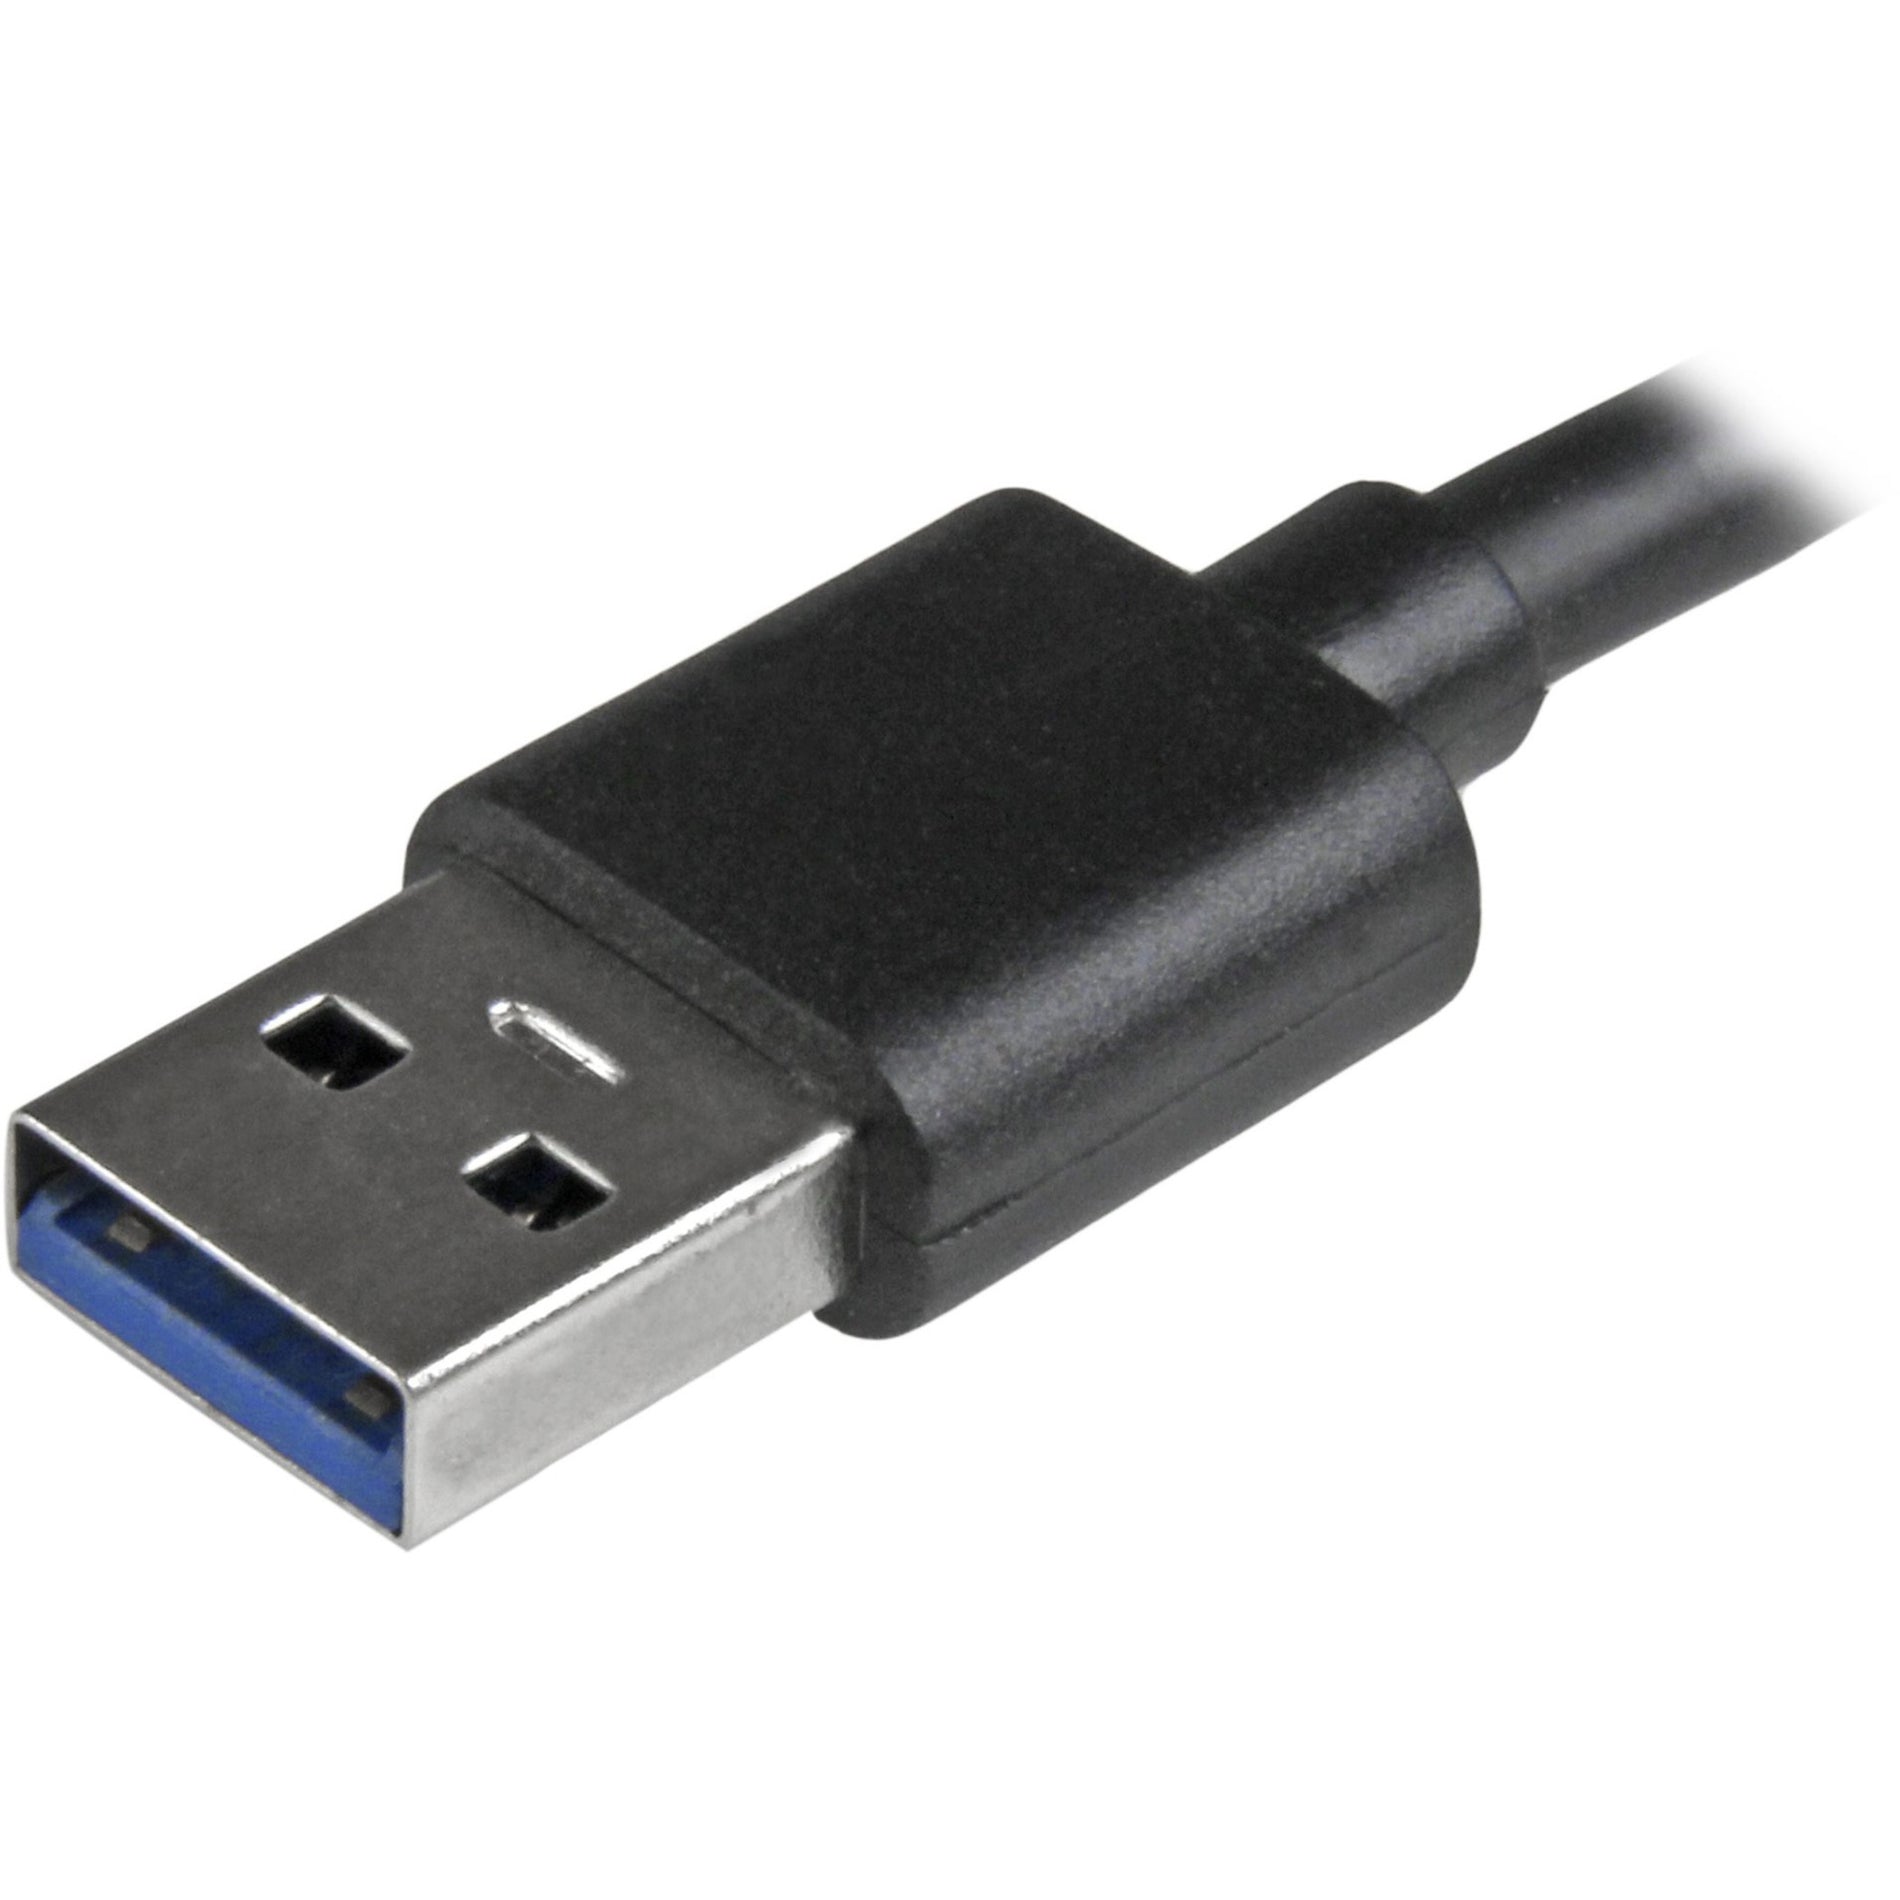 StarTech.com USB312SAT3 USB 3.1 (10 Gbps) Adapter Cable for 2.5in and 3.5in SATA SSD/HDD Drives, High-Speed Data Transfer